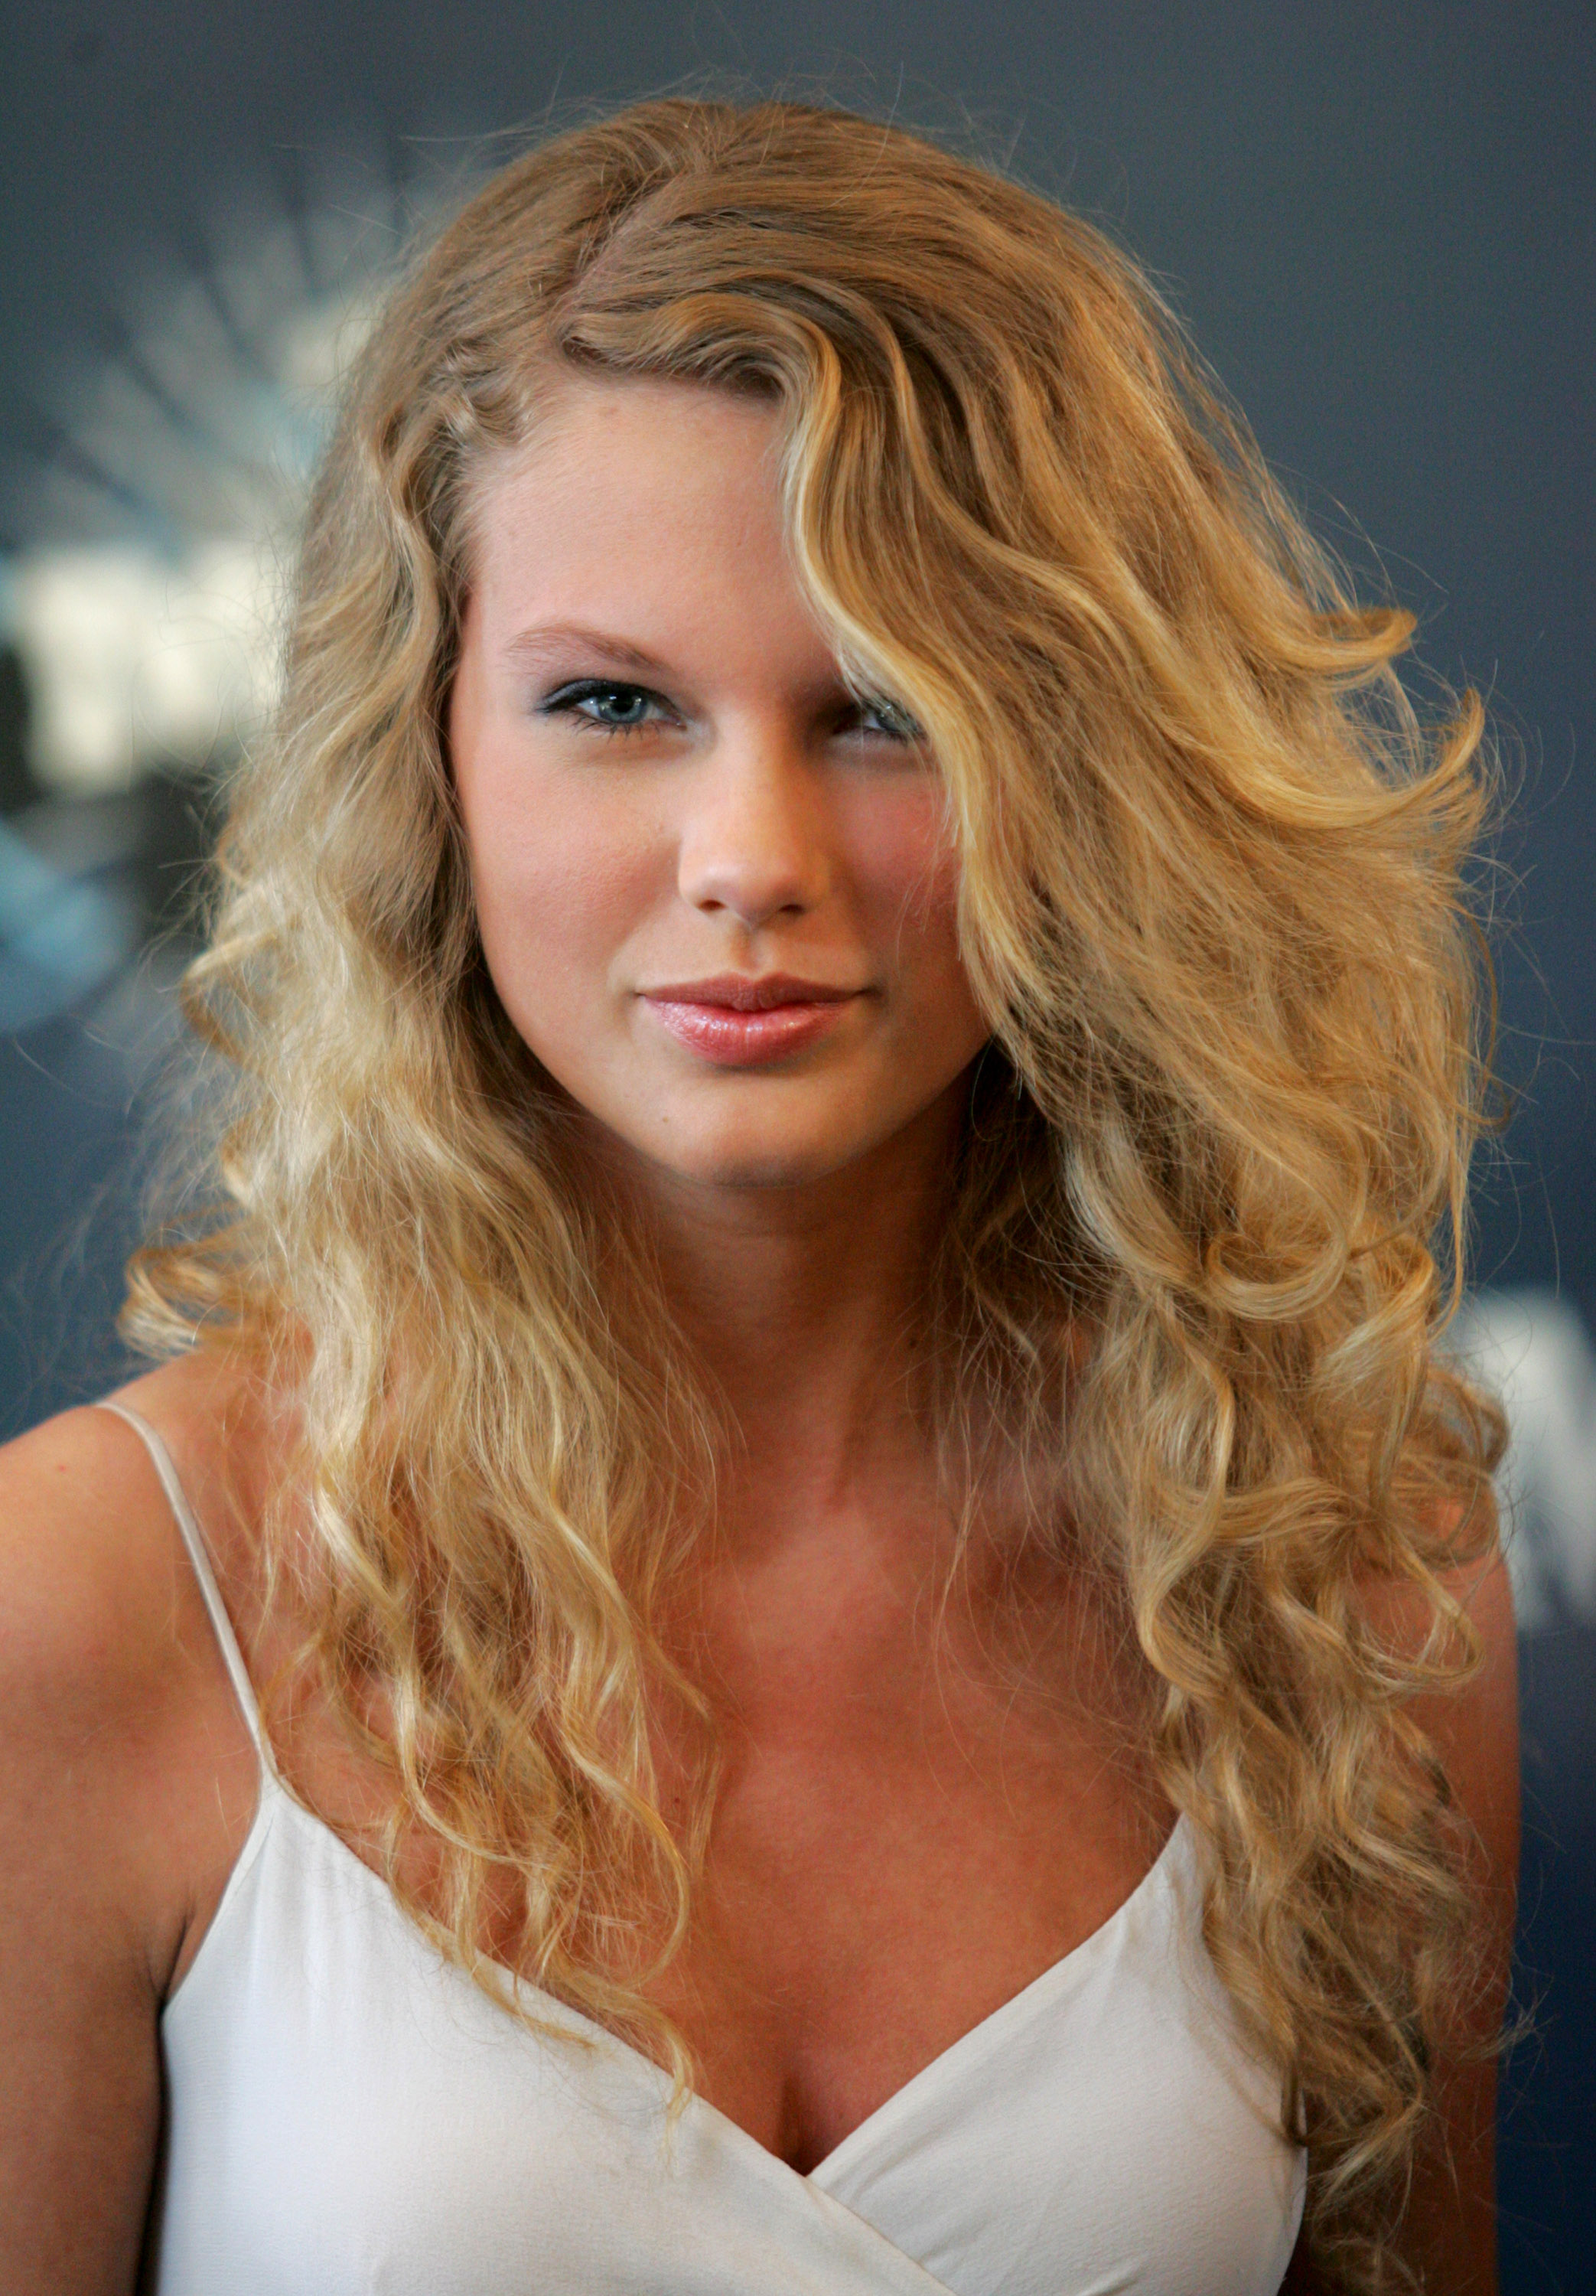 Taylor Swift at the 2006 CMT Music Awards on April 10, 2006 in Nashville. | Source: Getty Images